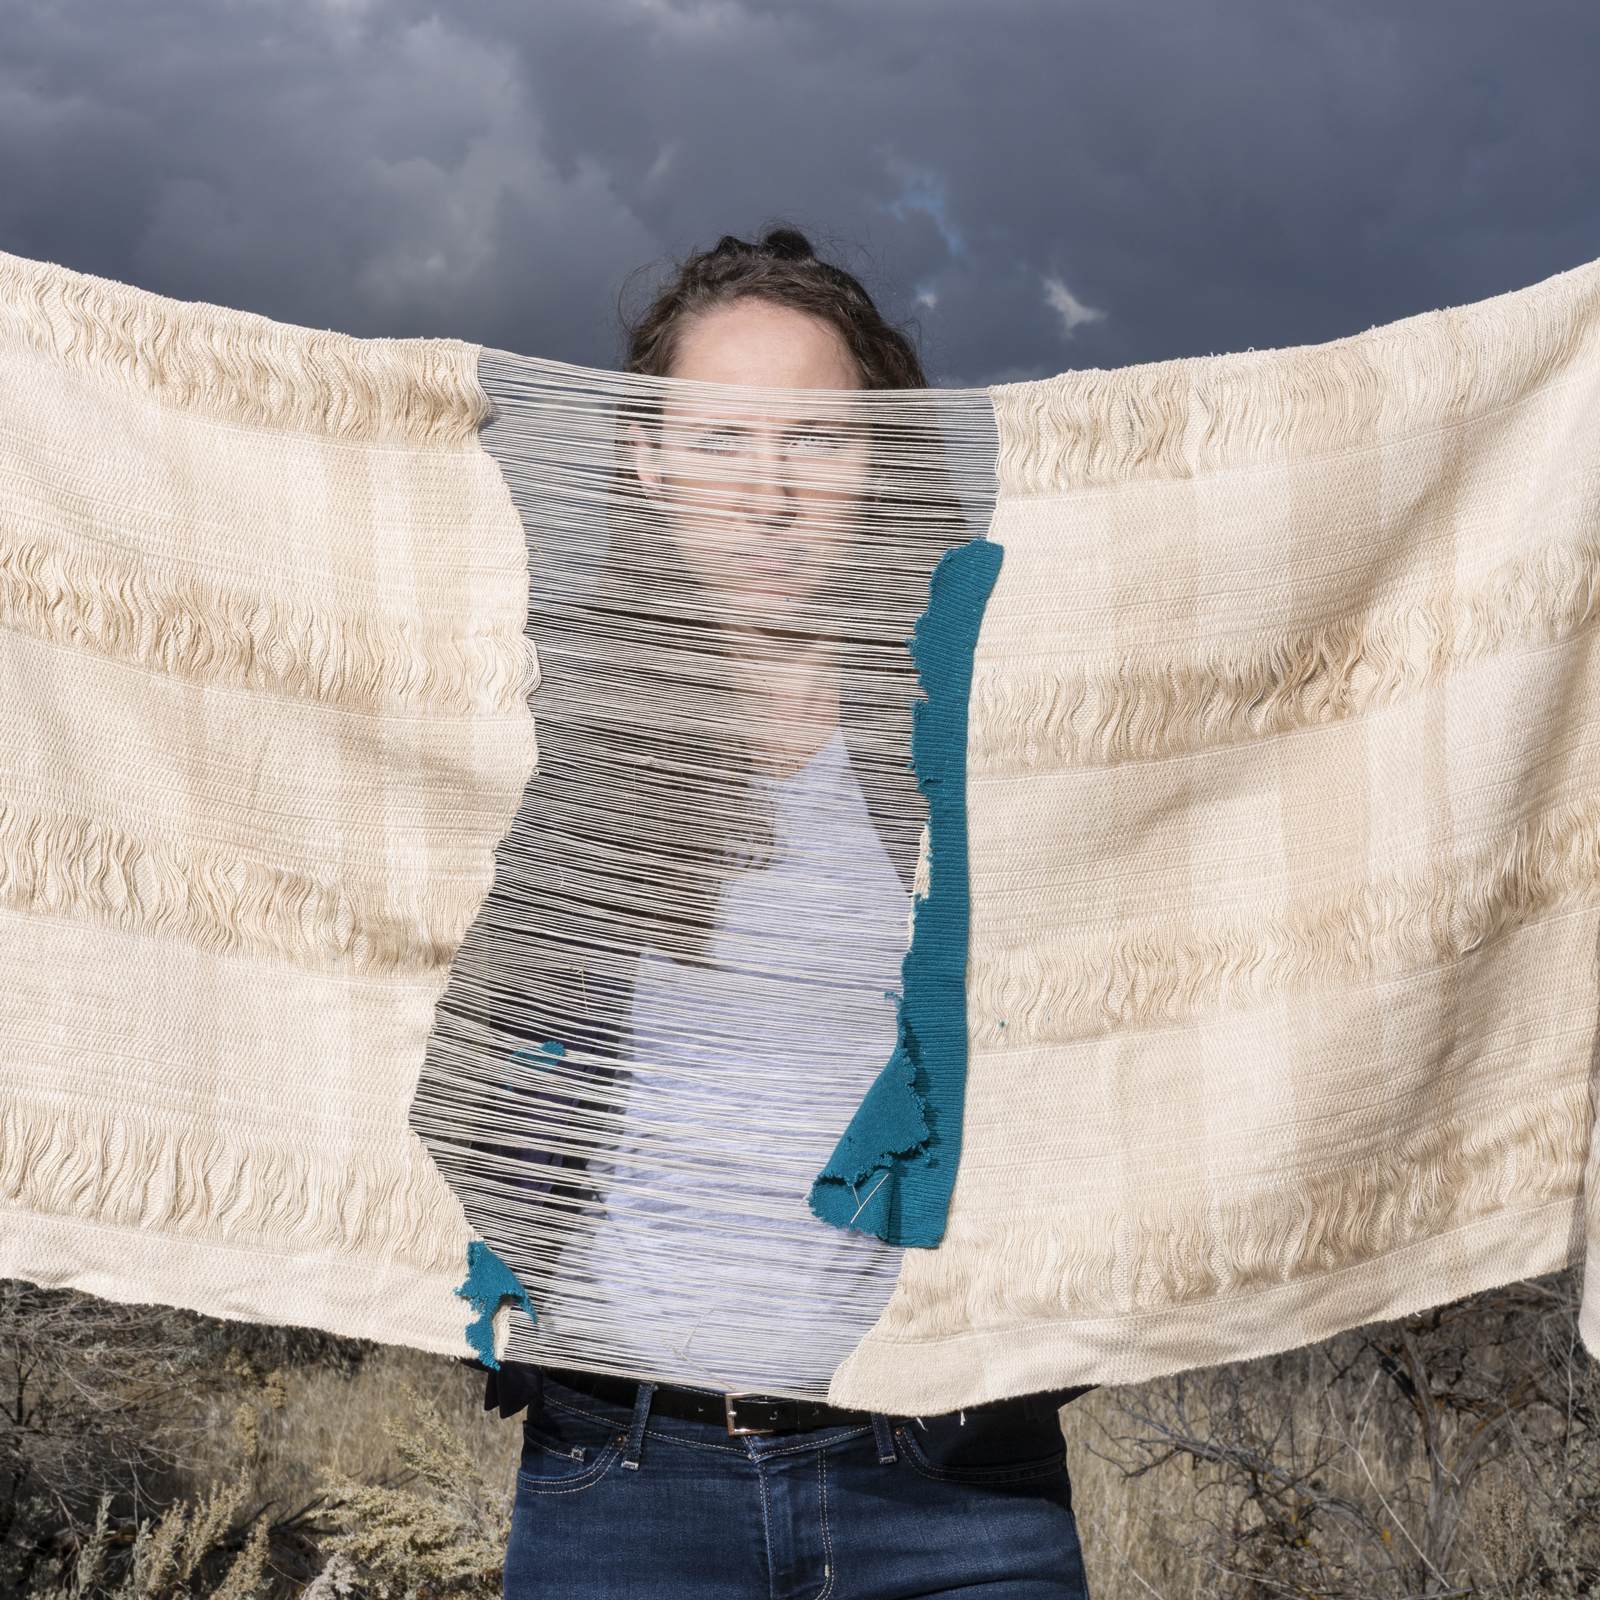 Artist Lily Lee holding burial shroud in front of her face